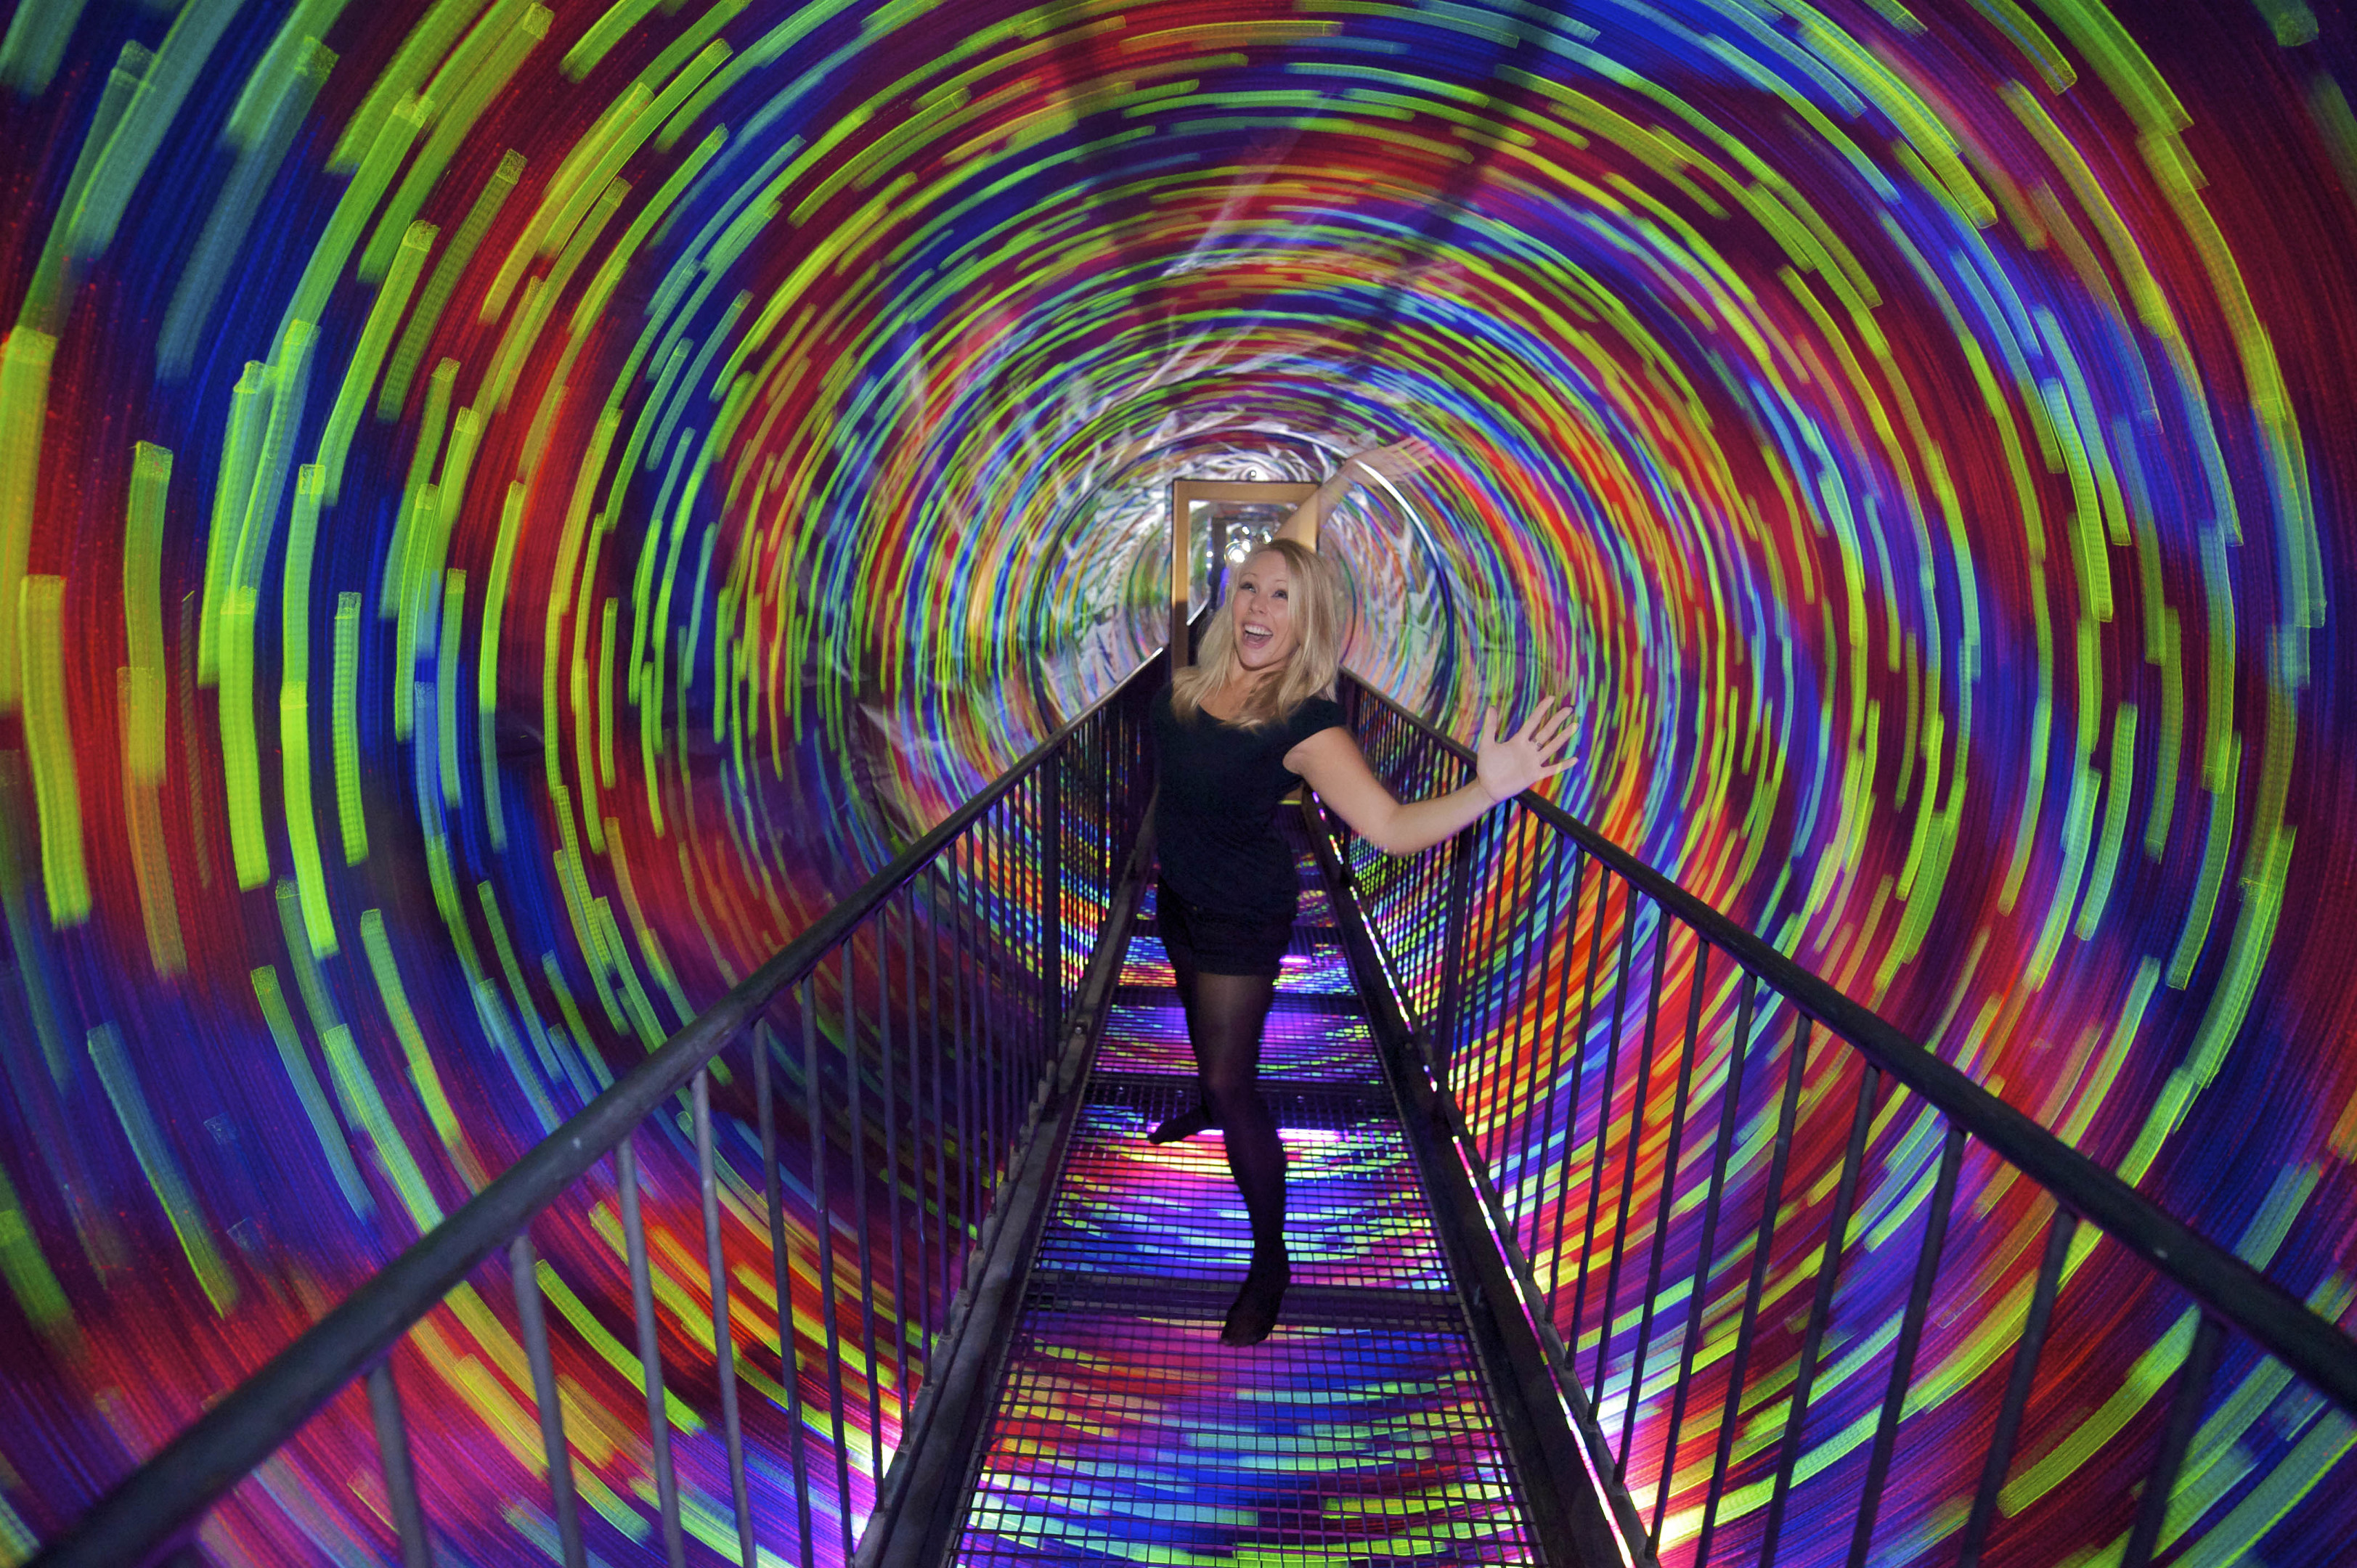 One of the new illusions at Edinburgh's Camera Obscura and World of Illusions the Vortex Tunnel